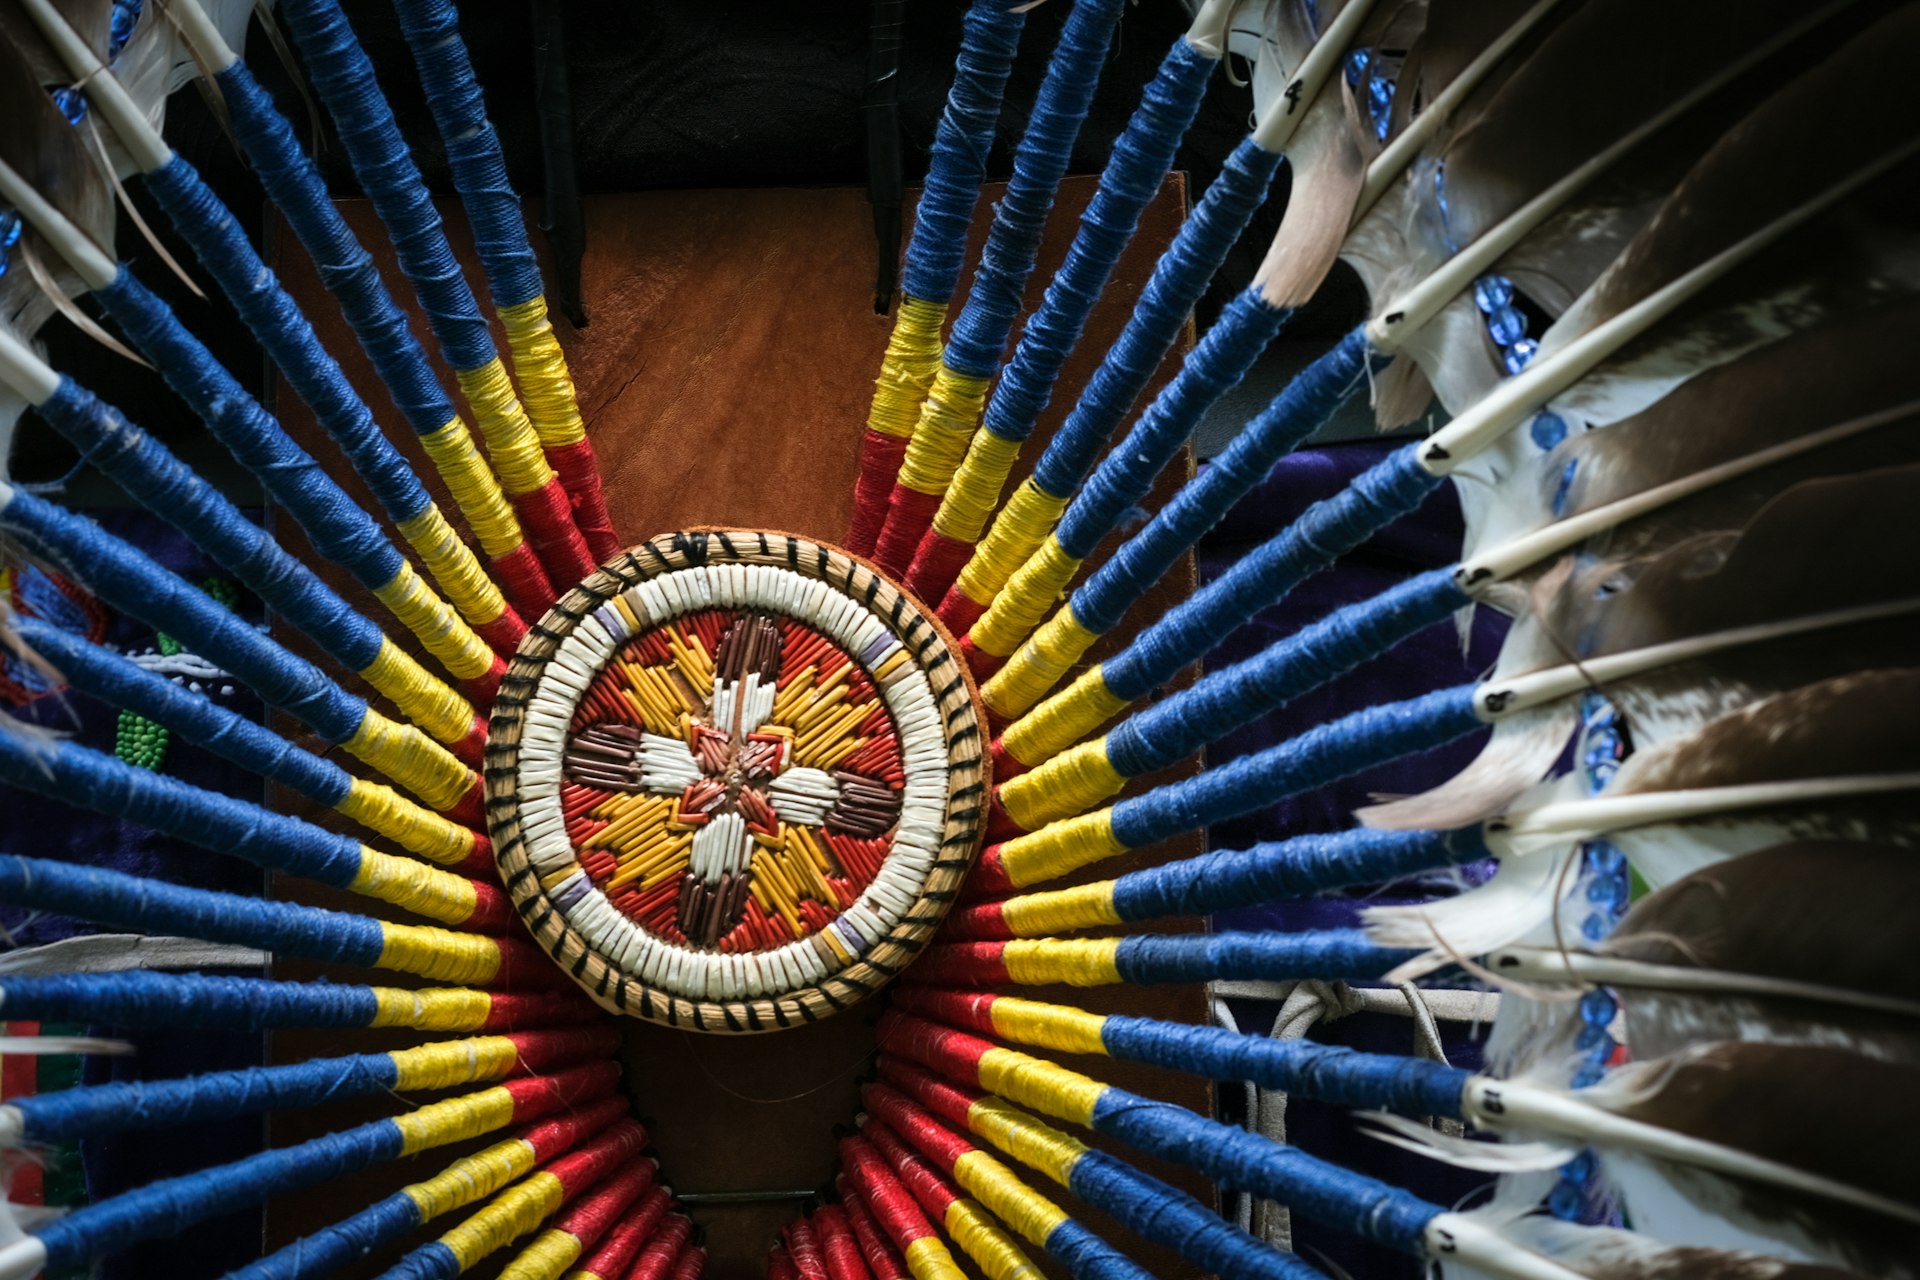 A close-up of part of a ceremonial First Nations costume with red, blue, yellow and white feathers and embroidery, Wendake, Québec, Canada